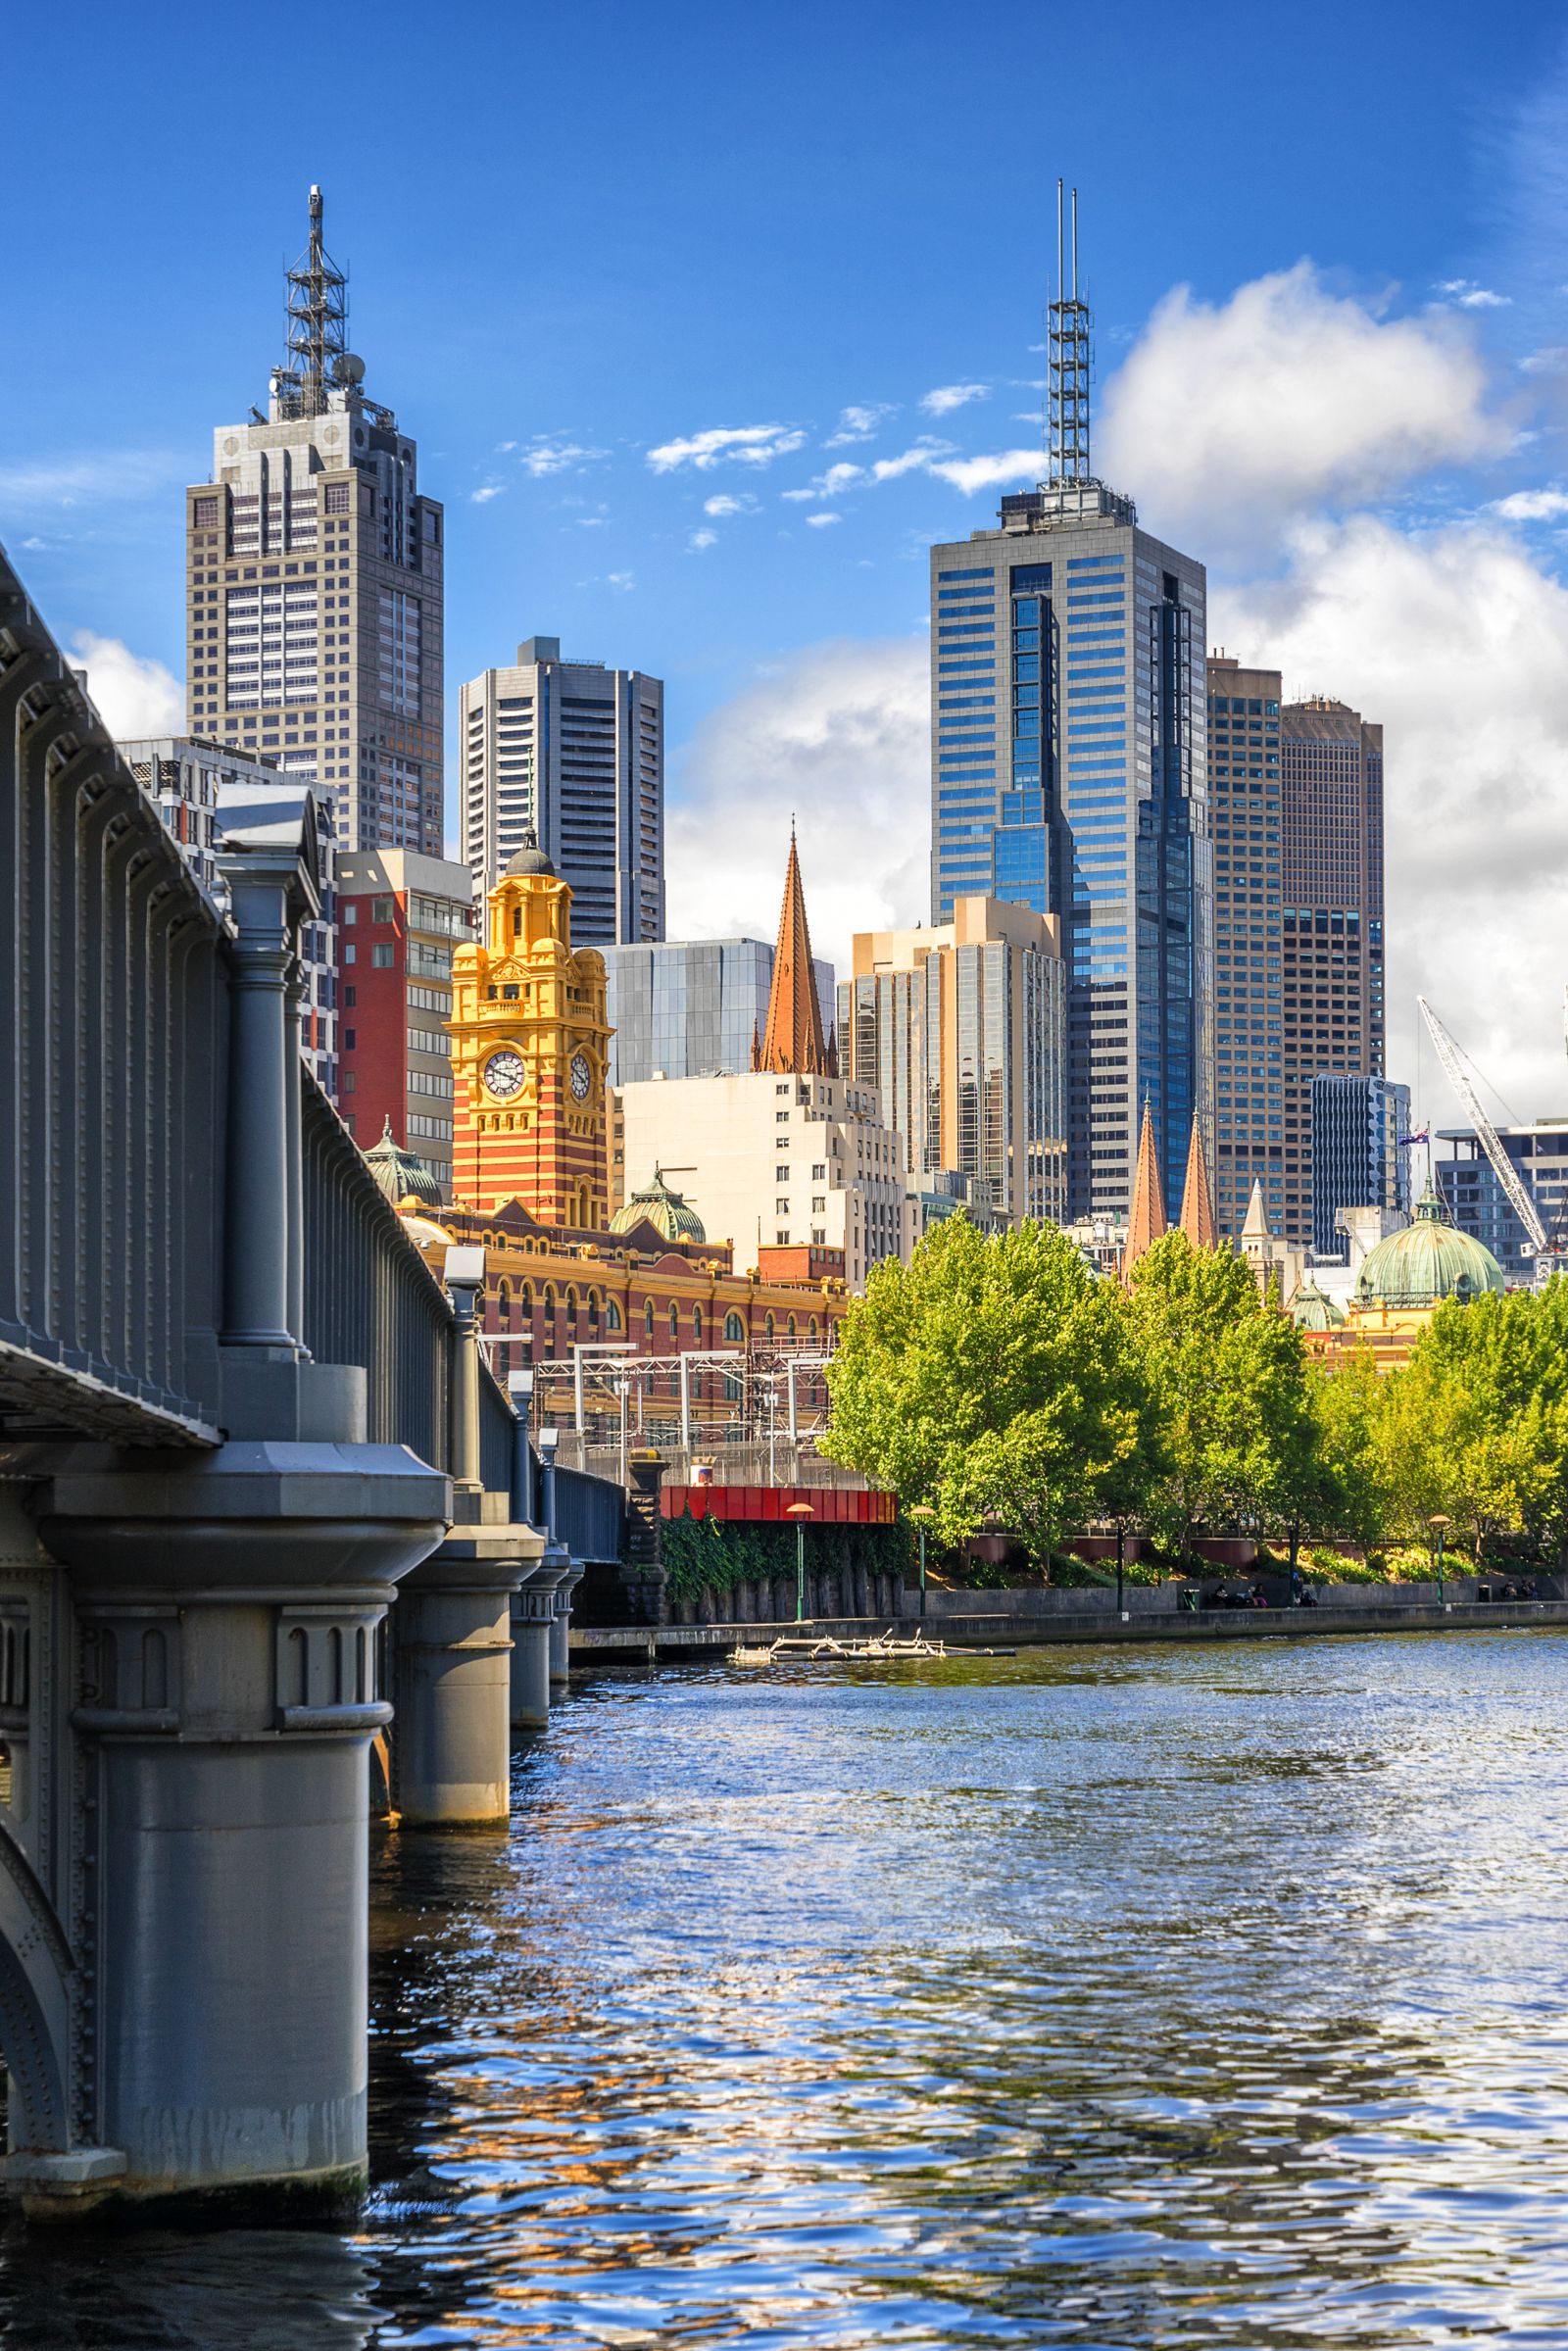 The Best Residential Places in Melbourne and Why